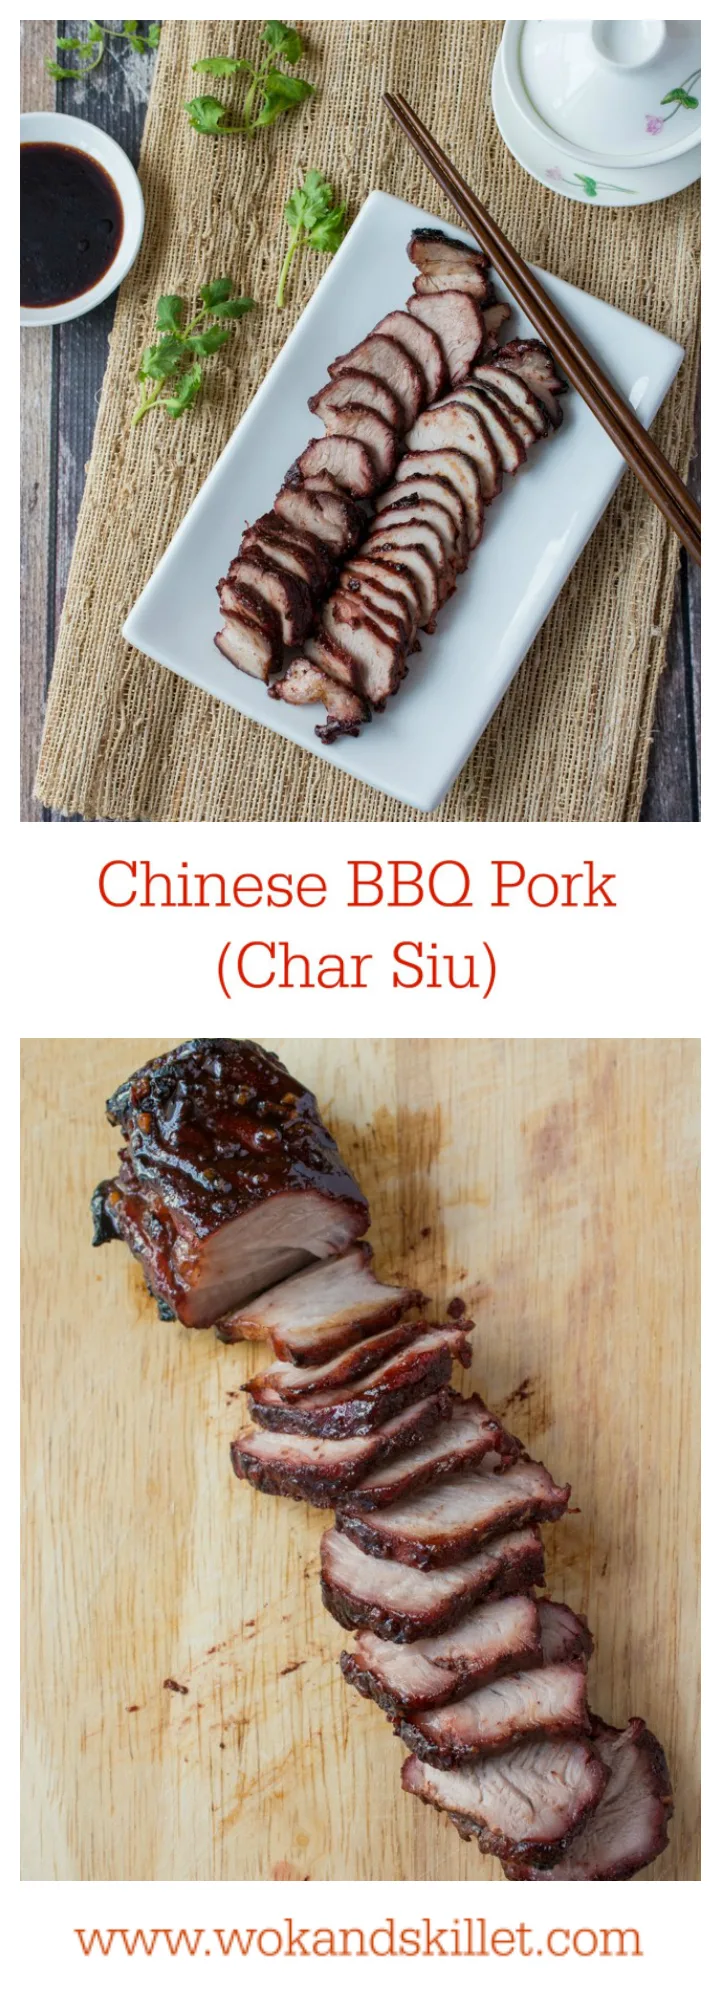 This Chinese BBQ Pork (Char Siu) recipe features a sweet, thick marinade that doubles as a dipping sauce. Now you can make this Chinatown favorite in your own kitchen! You won’t believe how easy this recipe is! 